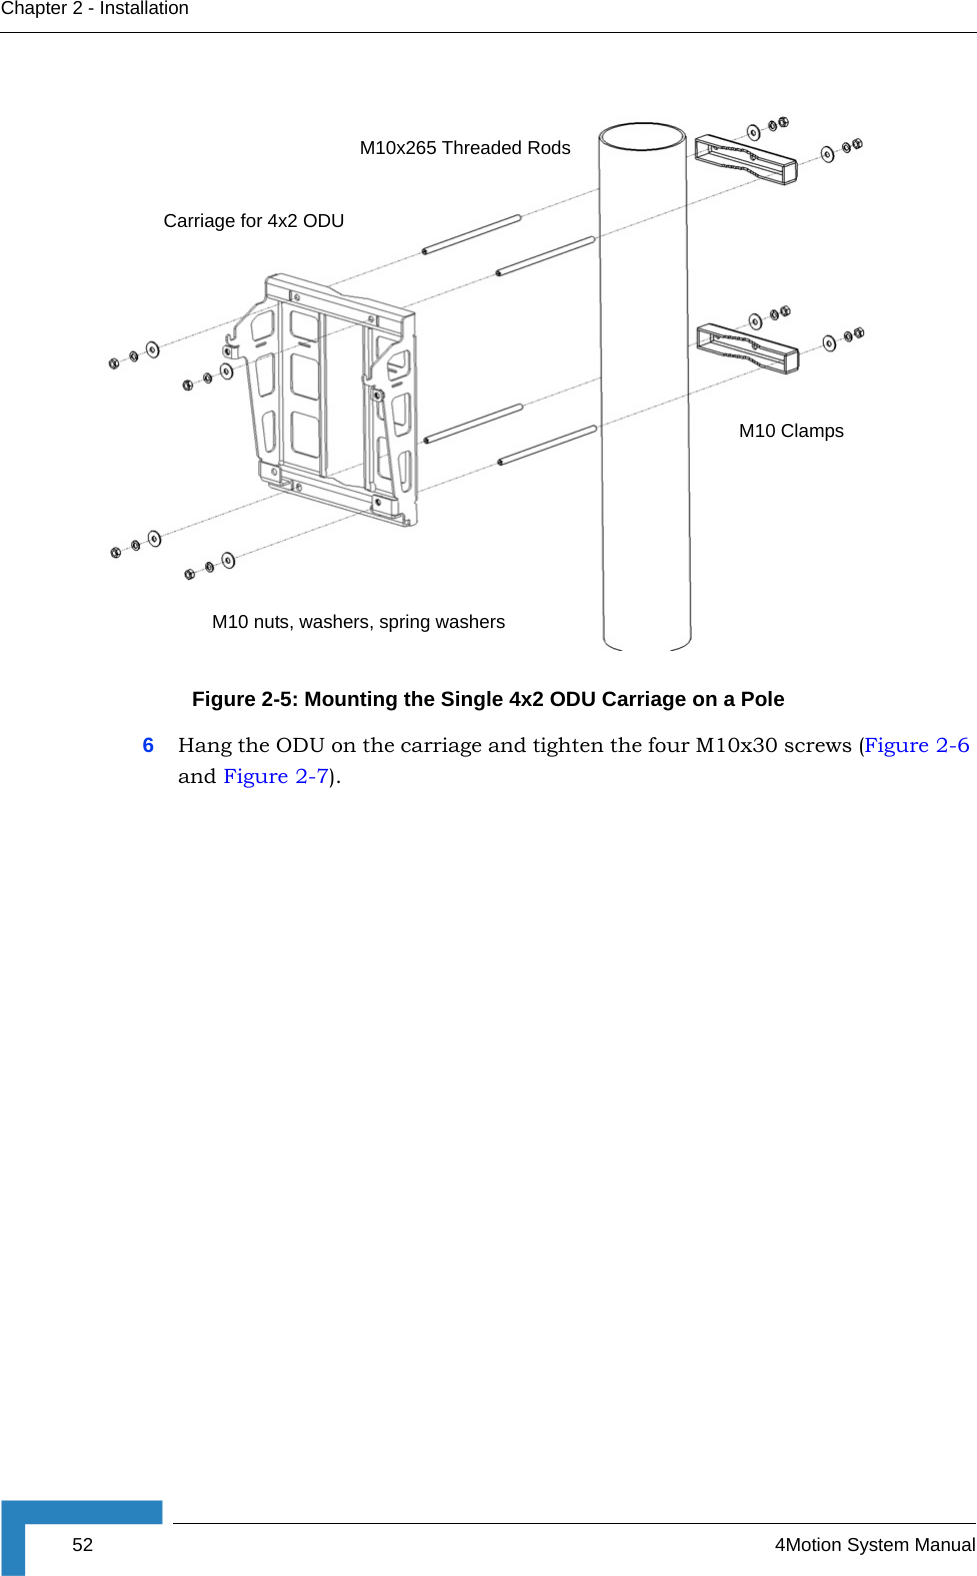 52 4Motion System ManualChapter 2 - Installation6Hang the ODU on the carriage and tighten the four M10x30 screws (Figure 2-6 and Figure 2-7). Figure 2-5: Mounting the Single 4x2 ODU Carriage on a PoleM10x265 Threaded RodsM10 ClampsM10 nuts, washers, spring washersCarriage for 4x2 ODU